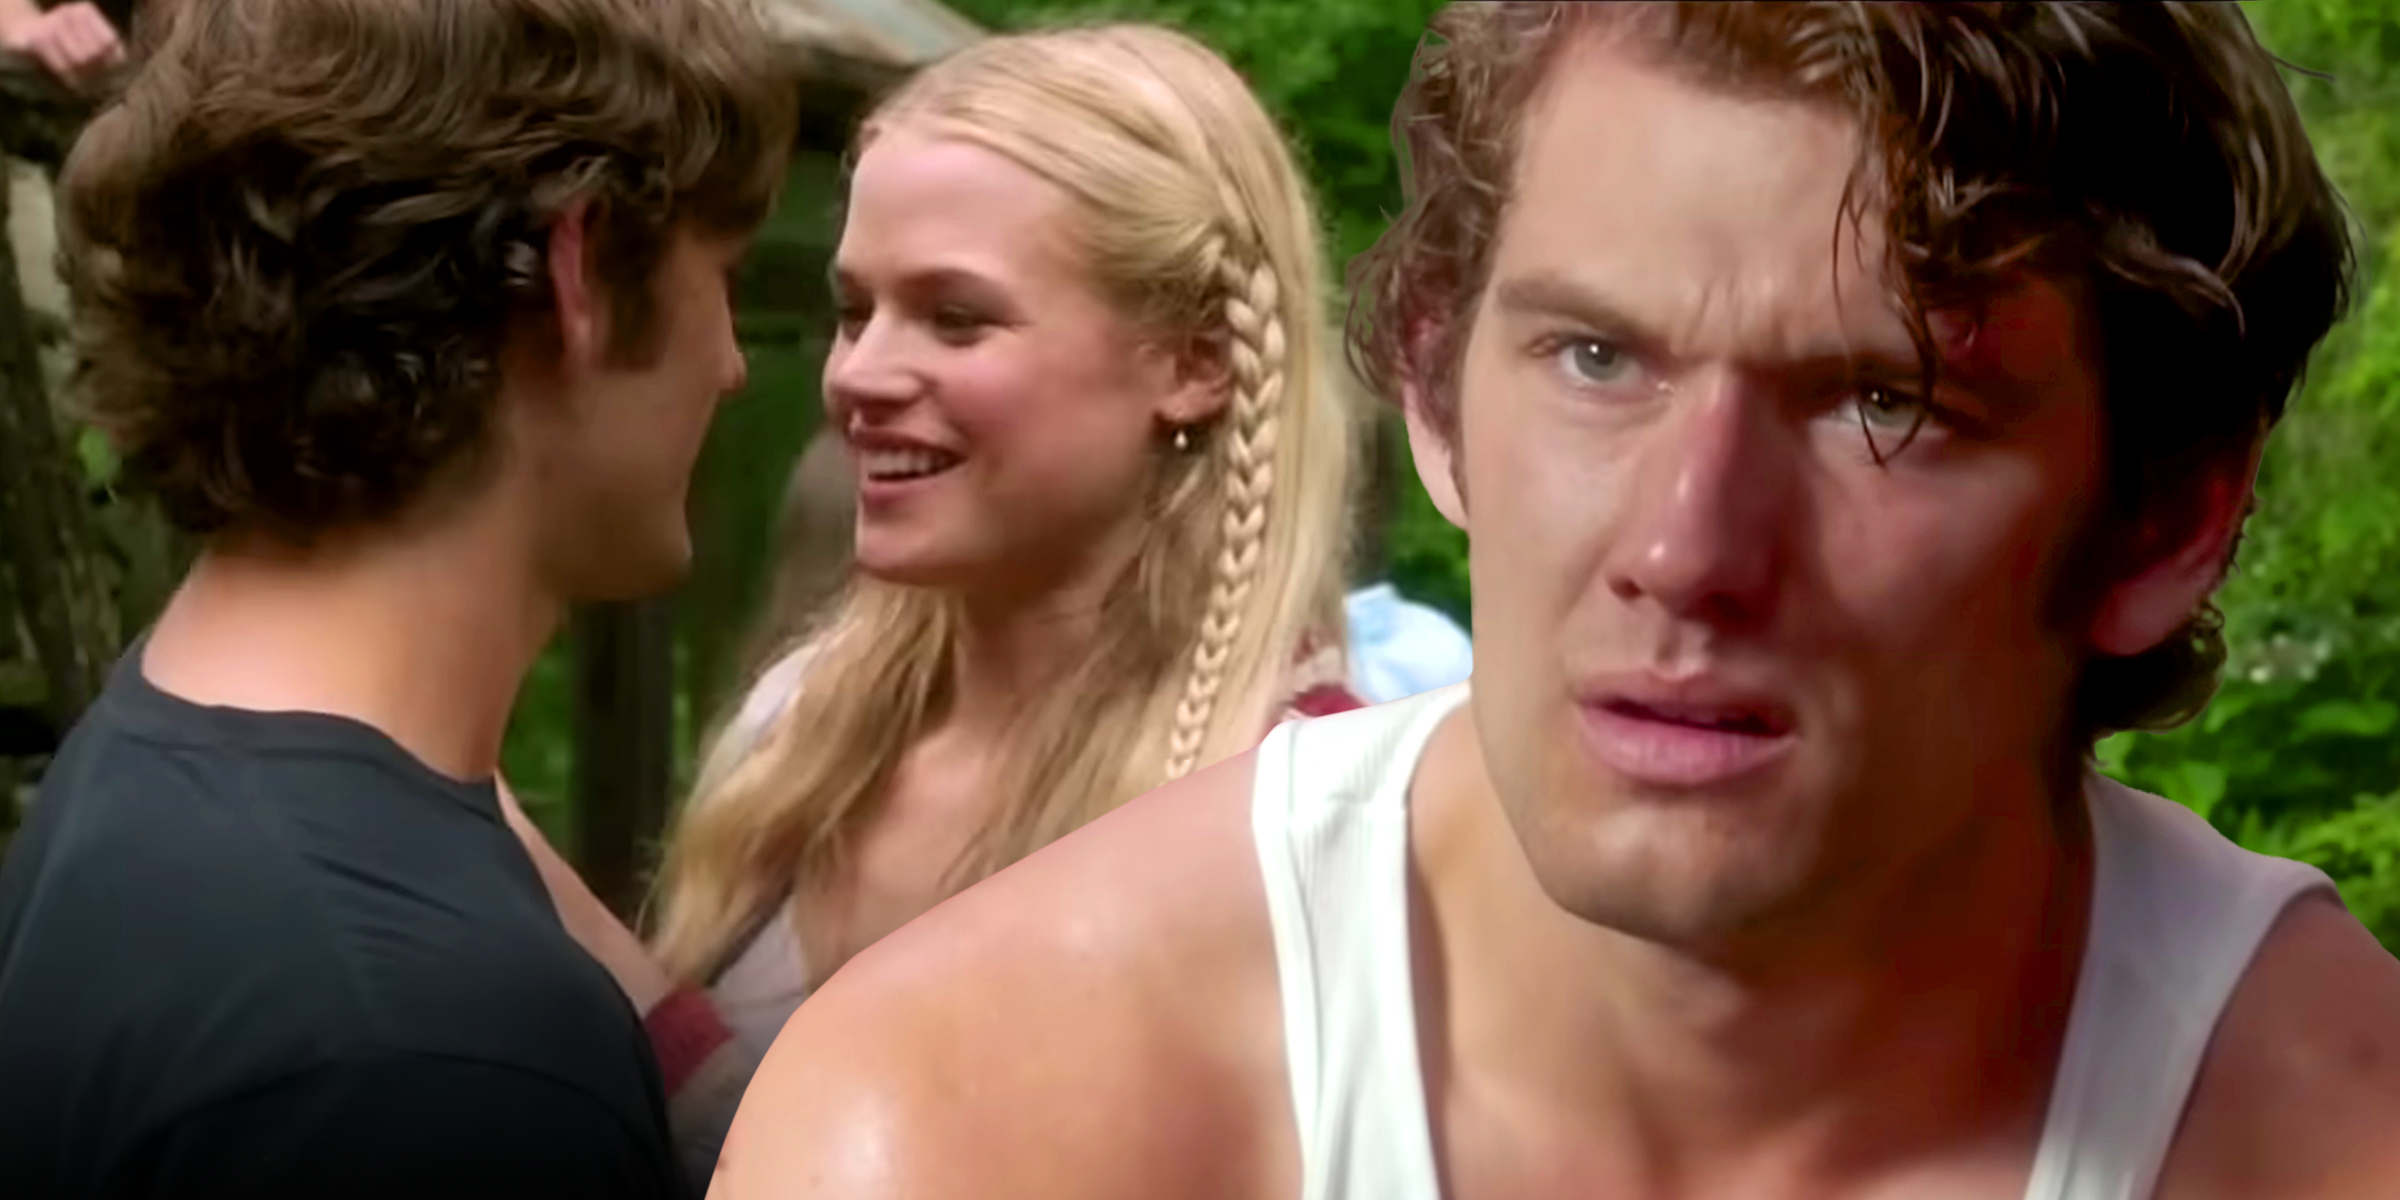 Photo of David and Jade from "Endless Love" | Photo of David from "Endless Love" | Source: YouTube/Universal Pictures